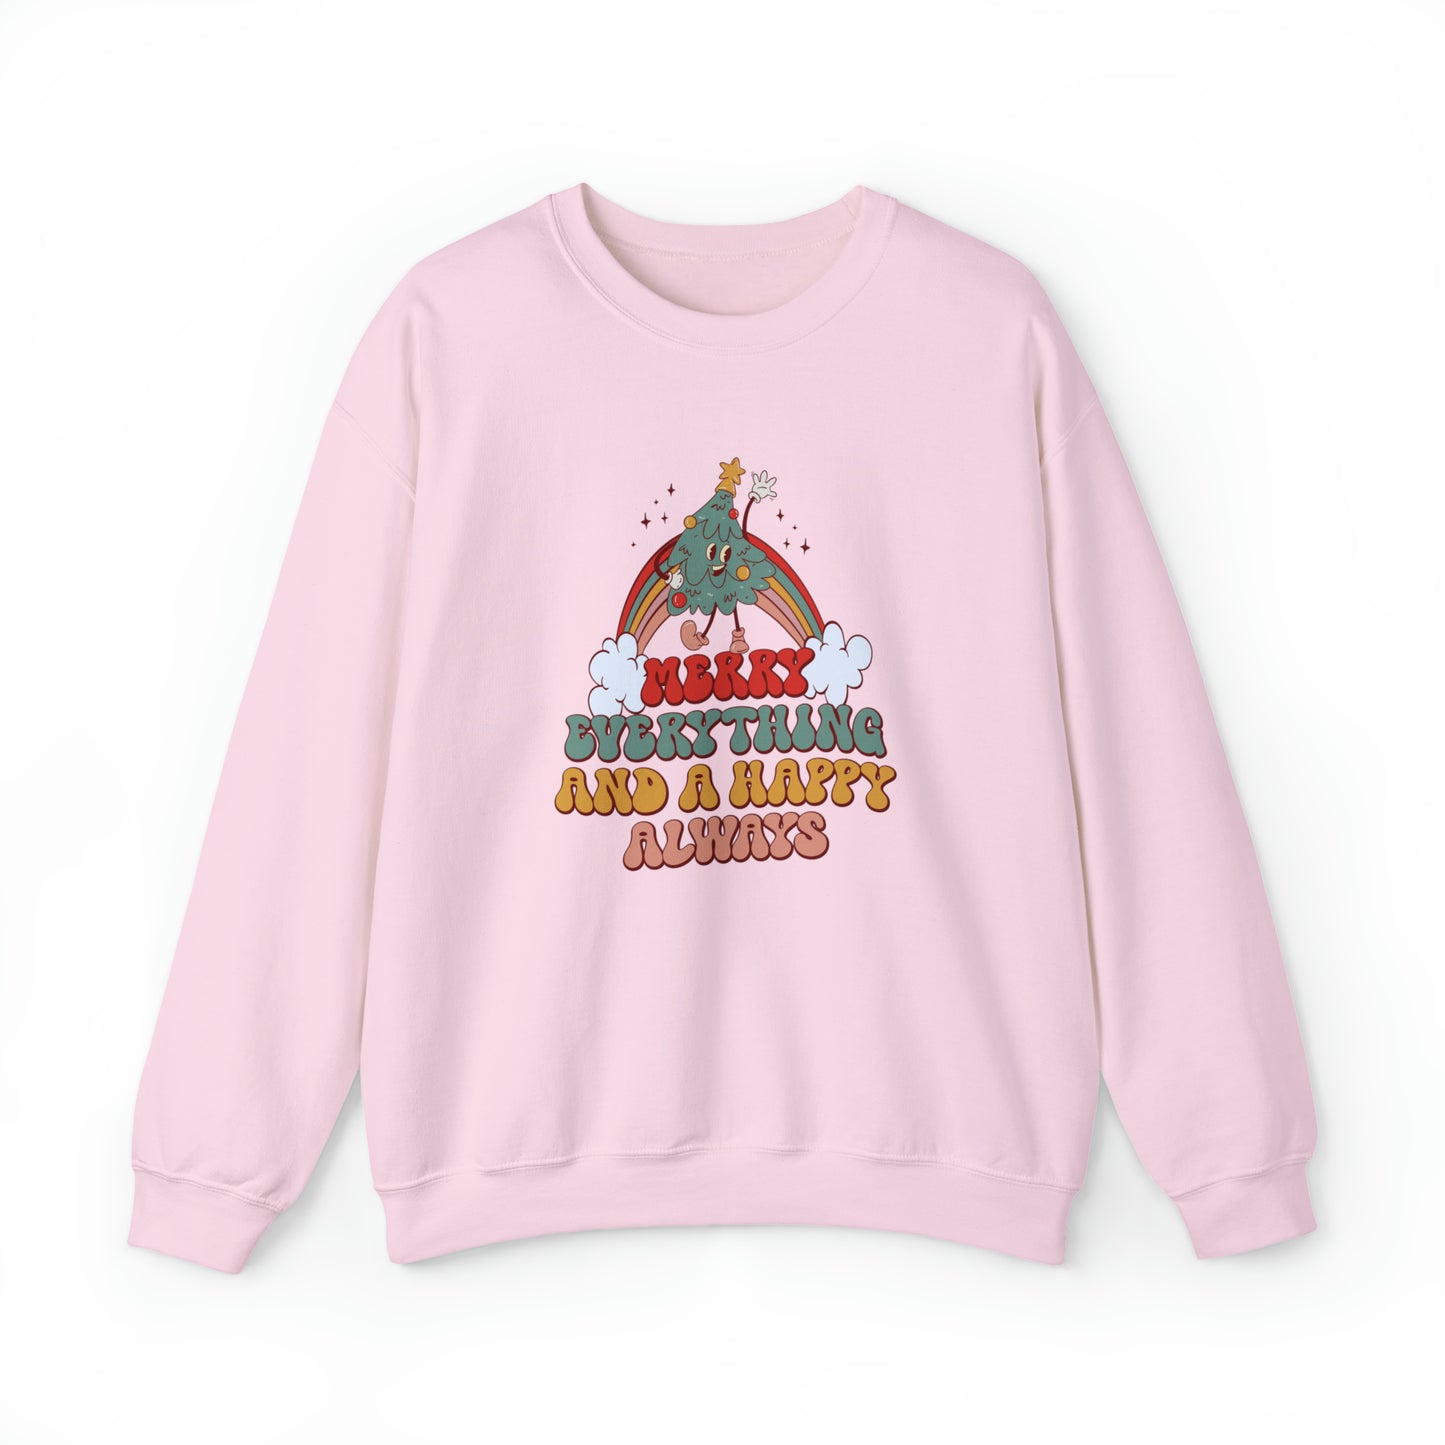 Merry Everything and a Happy Always Christmas Sweatshirt | Matching Christmas Jumpers | Xmas Gift | Christmas Sweater, Fun, Unique, Quirky